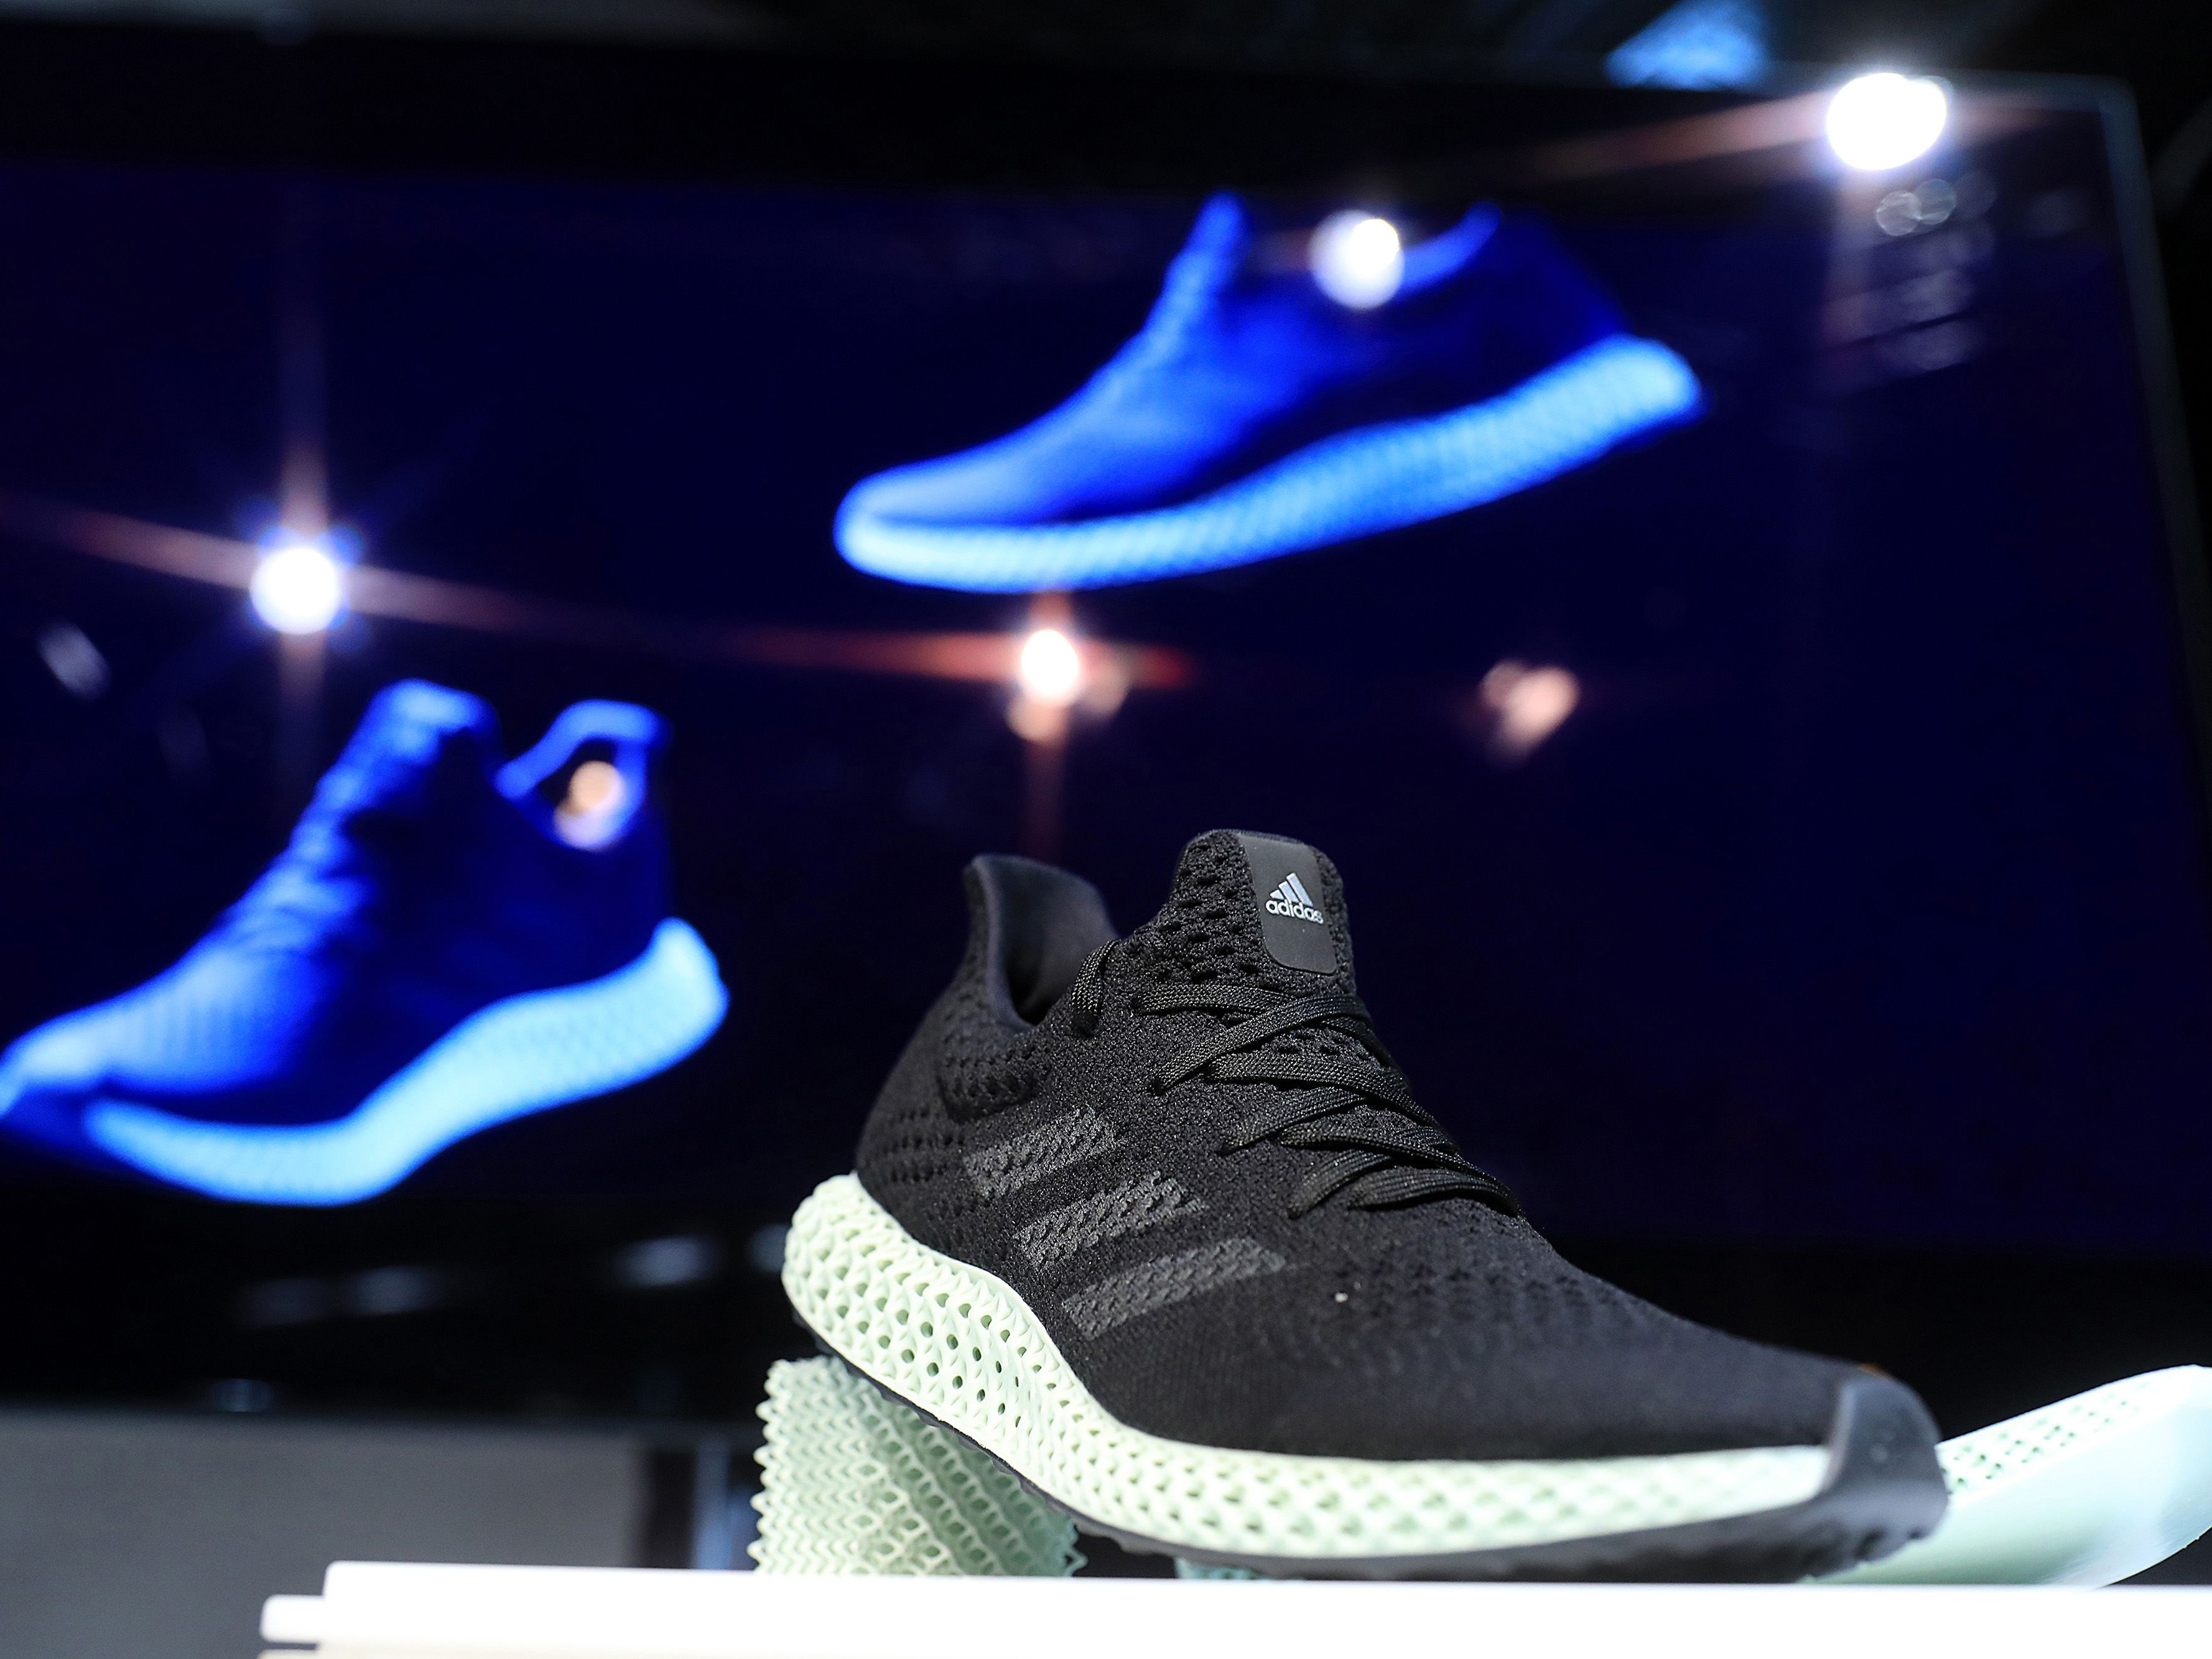 Leerling telescoop twist Nike, Adidas Output Snarled as Covid Shuts Asian Factories | 2021-07-26 |  SupplyChainBrain